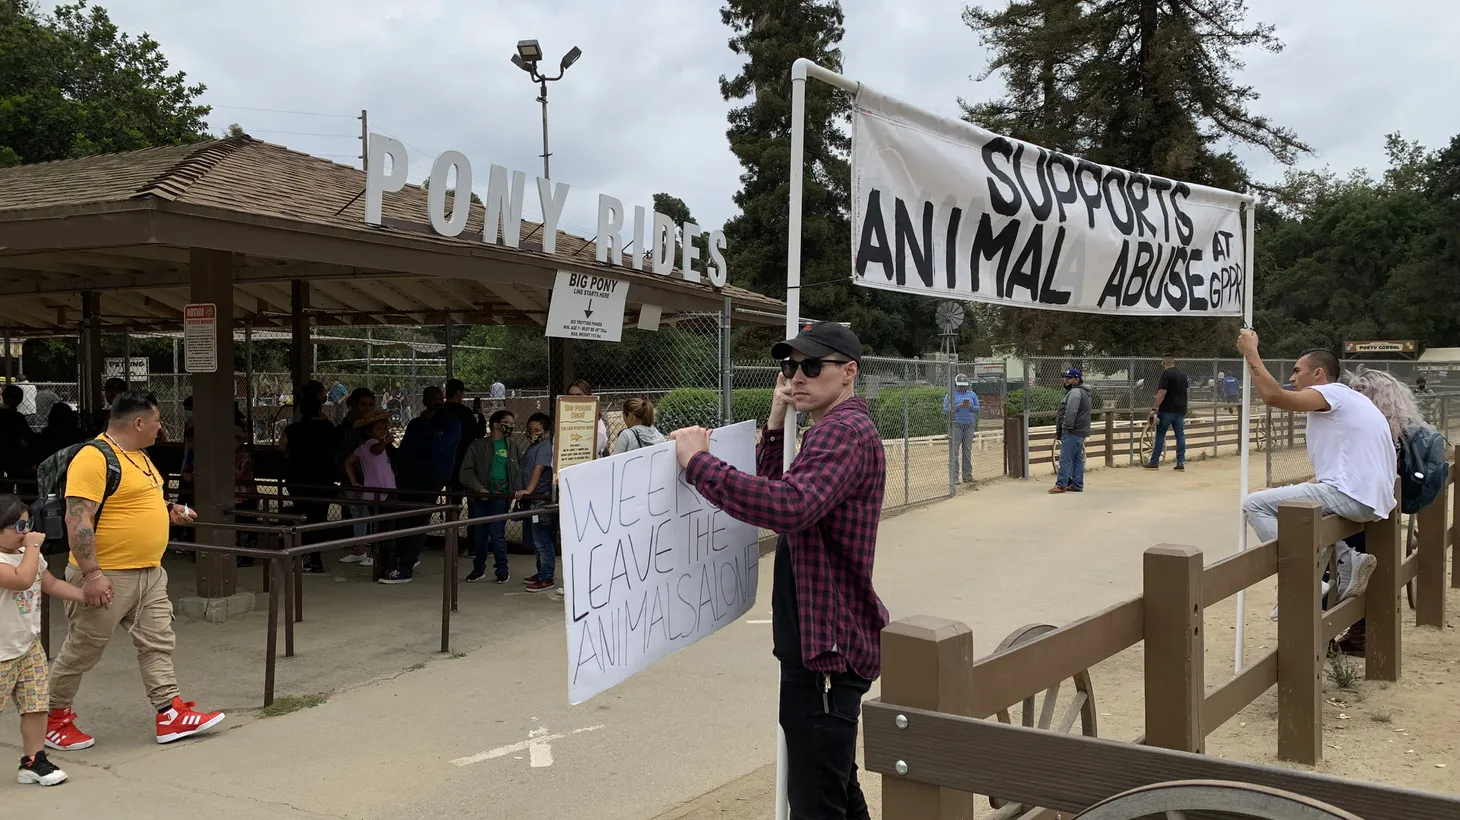 “For the Animals” is one of two groups of protesters that have been speaking out against Griffith Park Pony Rides.